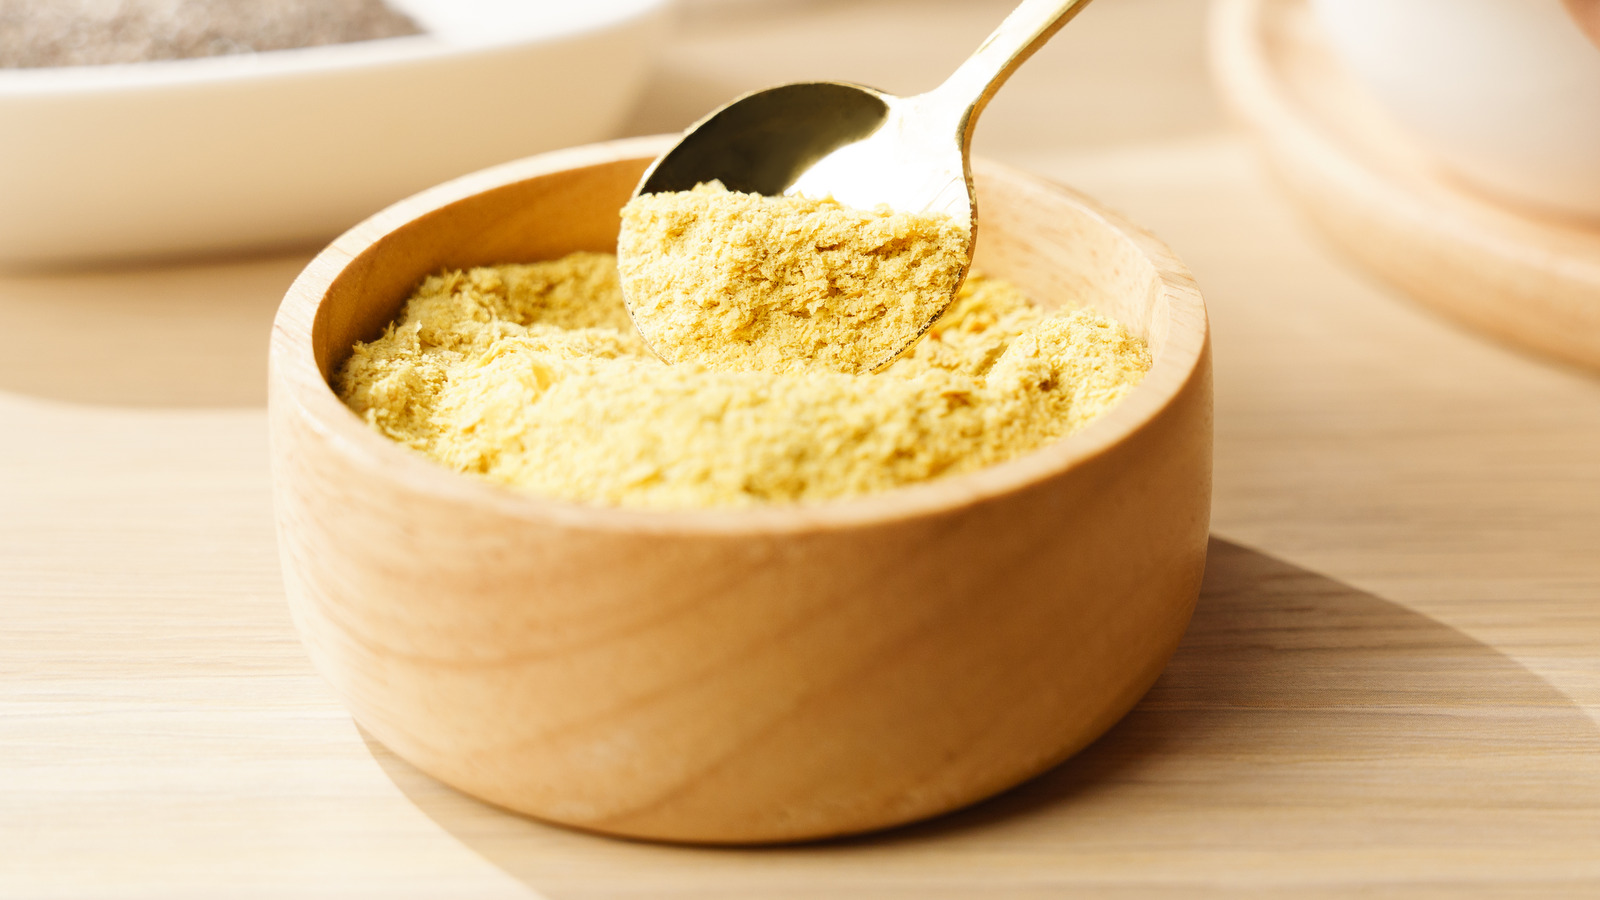 Nutritional Yeast: What It Is, How It's Made, and How to Use It